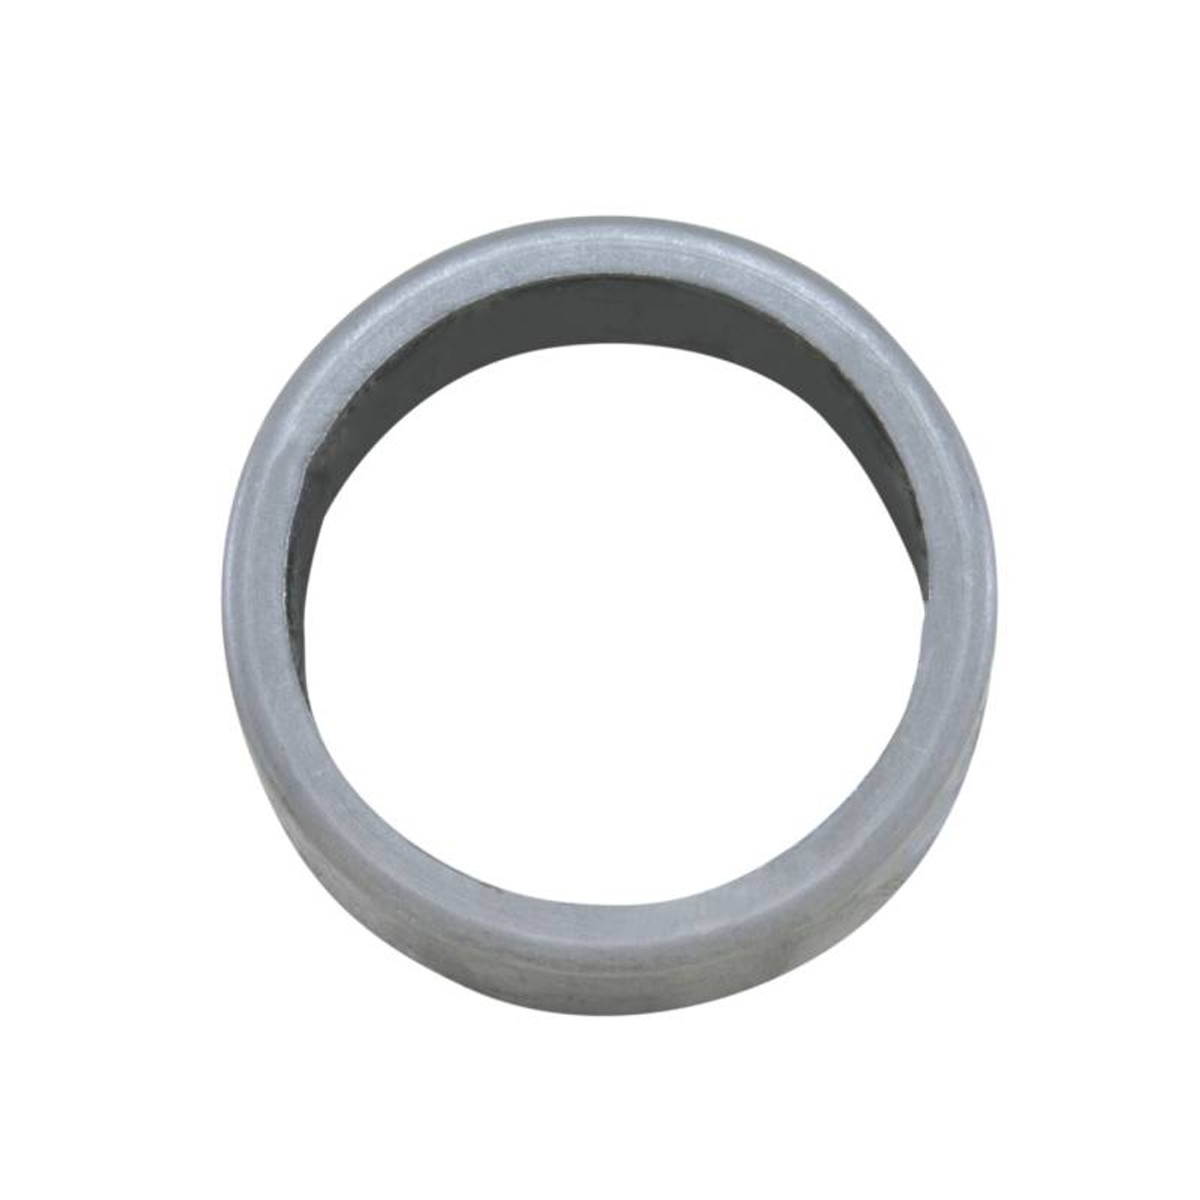 Spindle Nut Washer For Dana 50 & 60 2 Inch I.D YSPSP-022